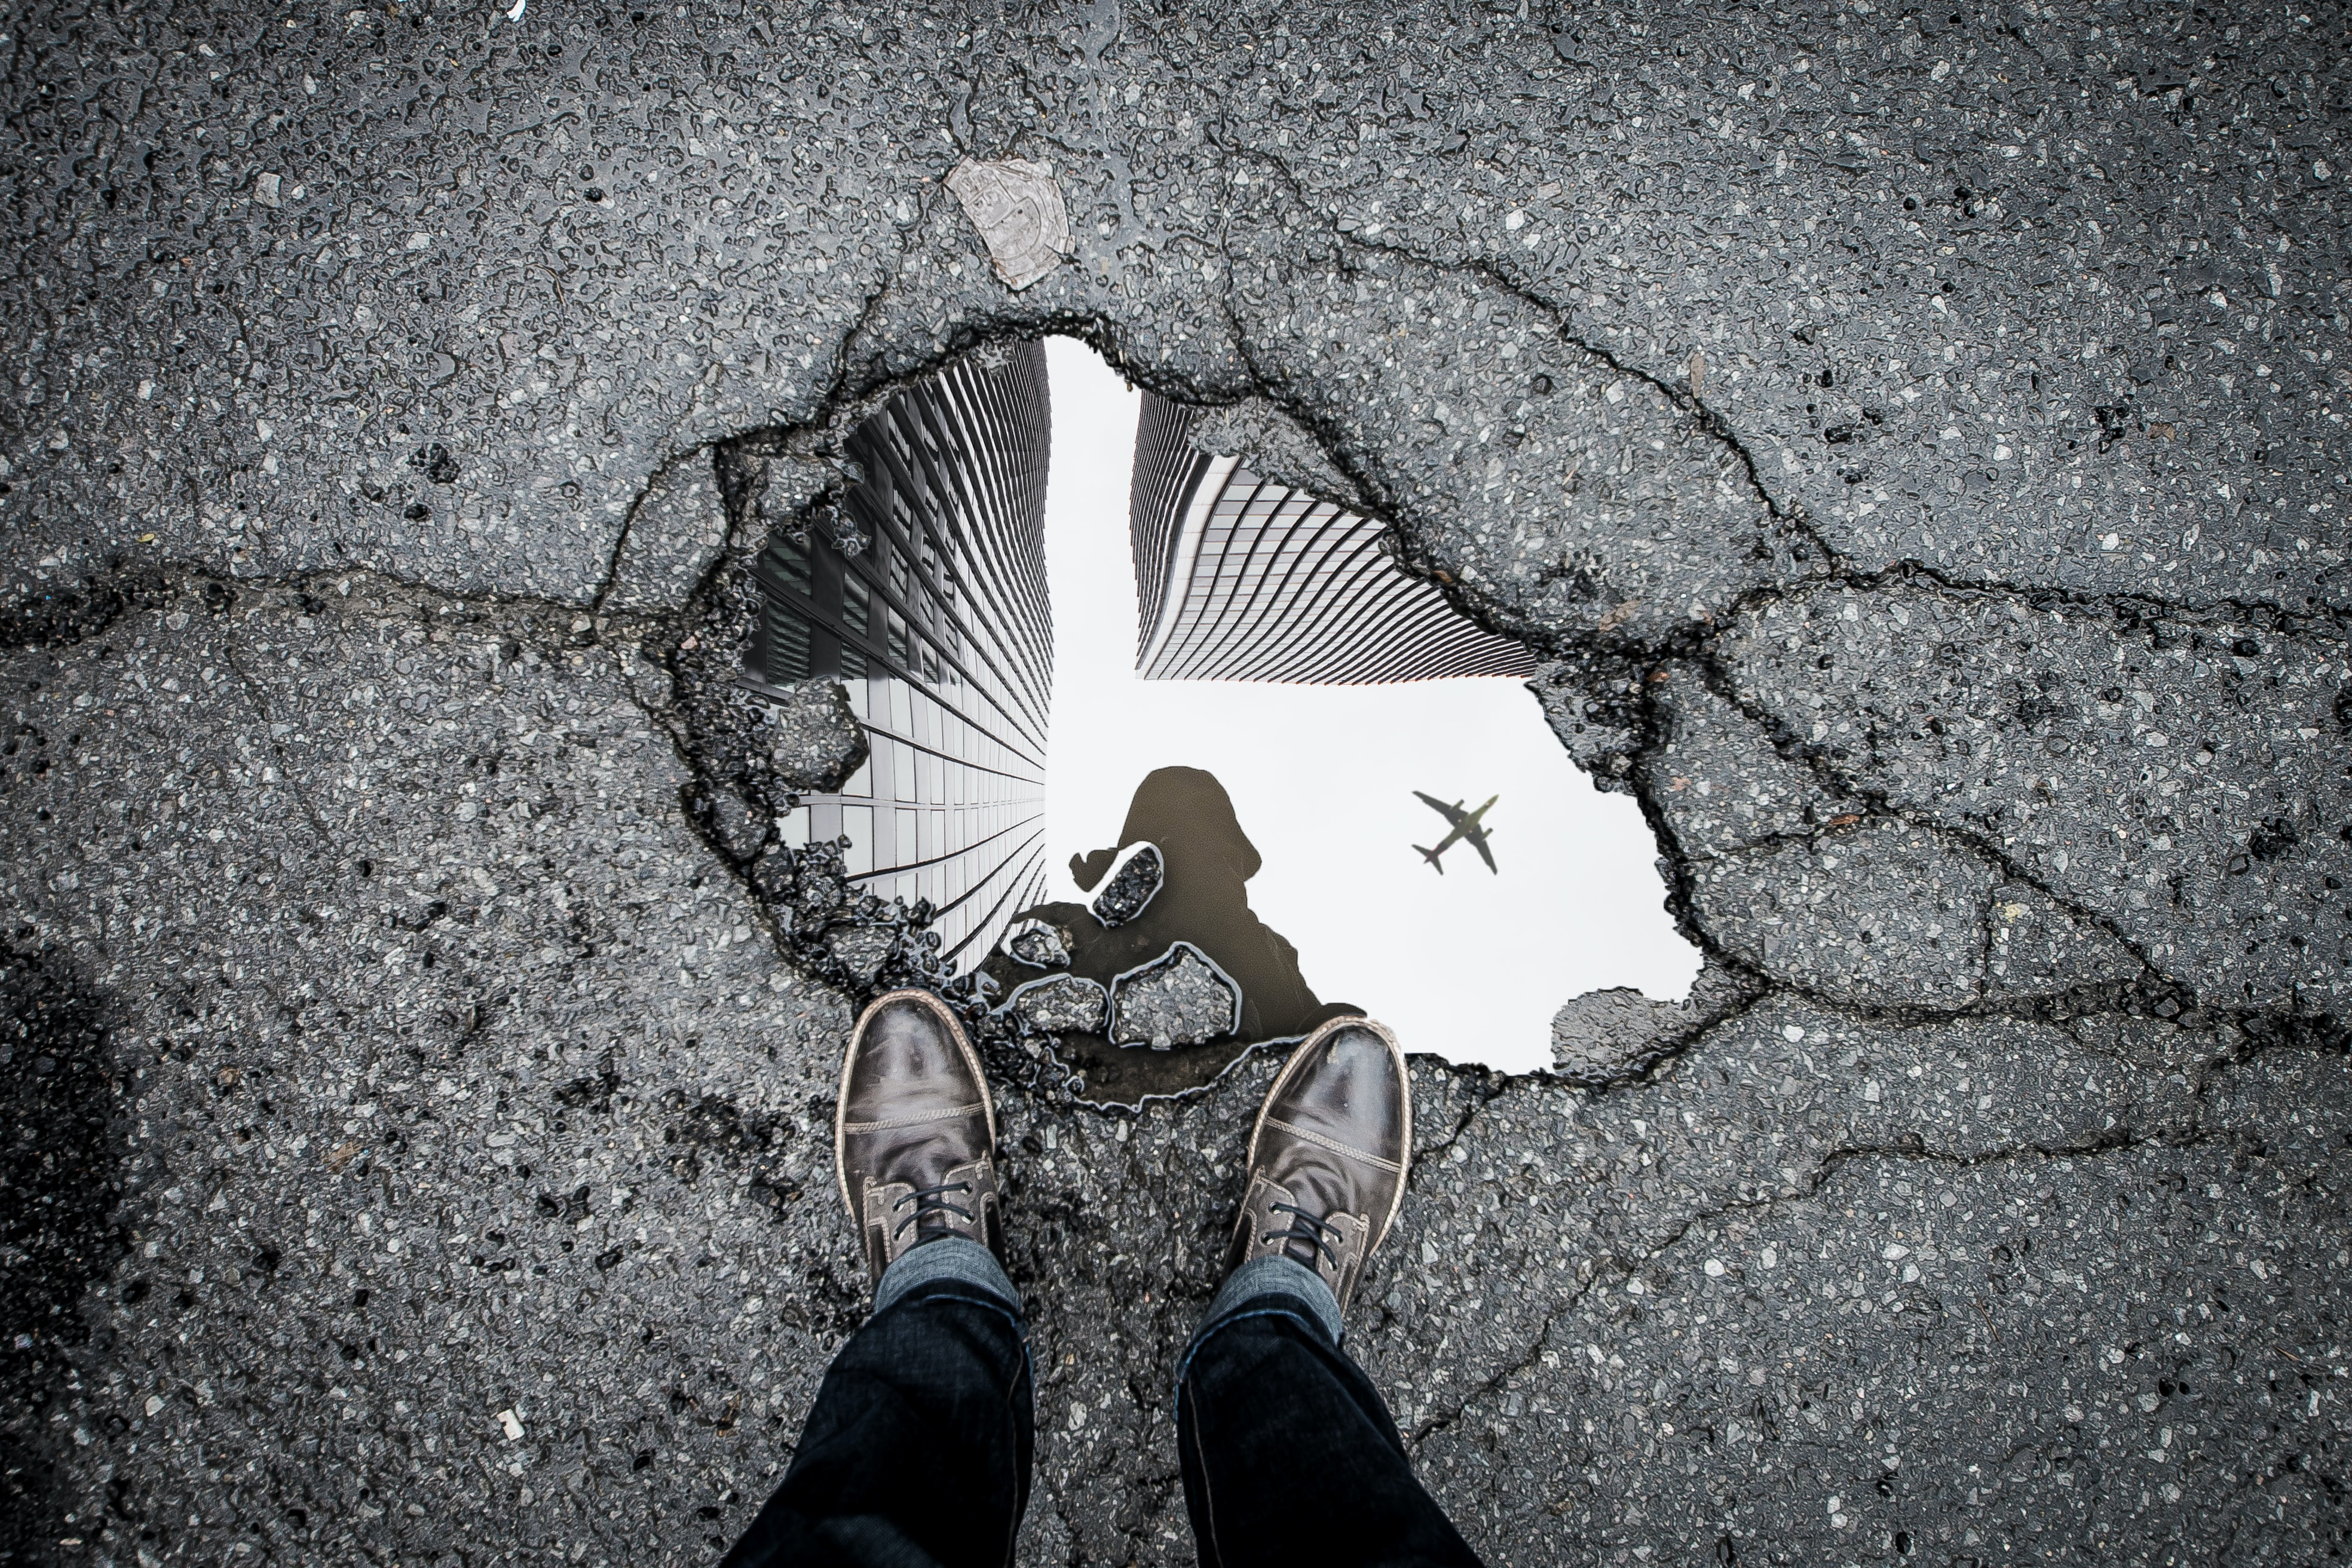 Puddle in pavement reflecting person above